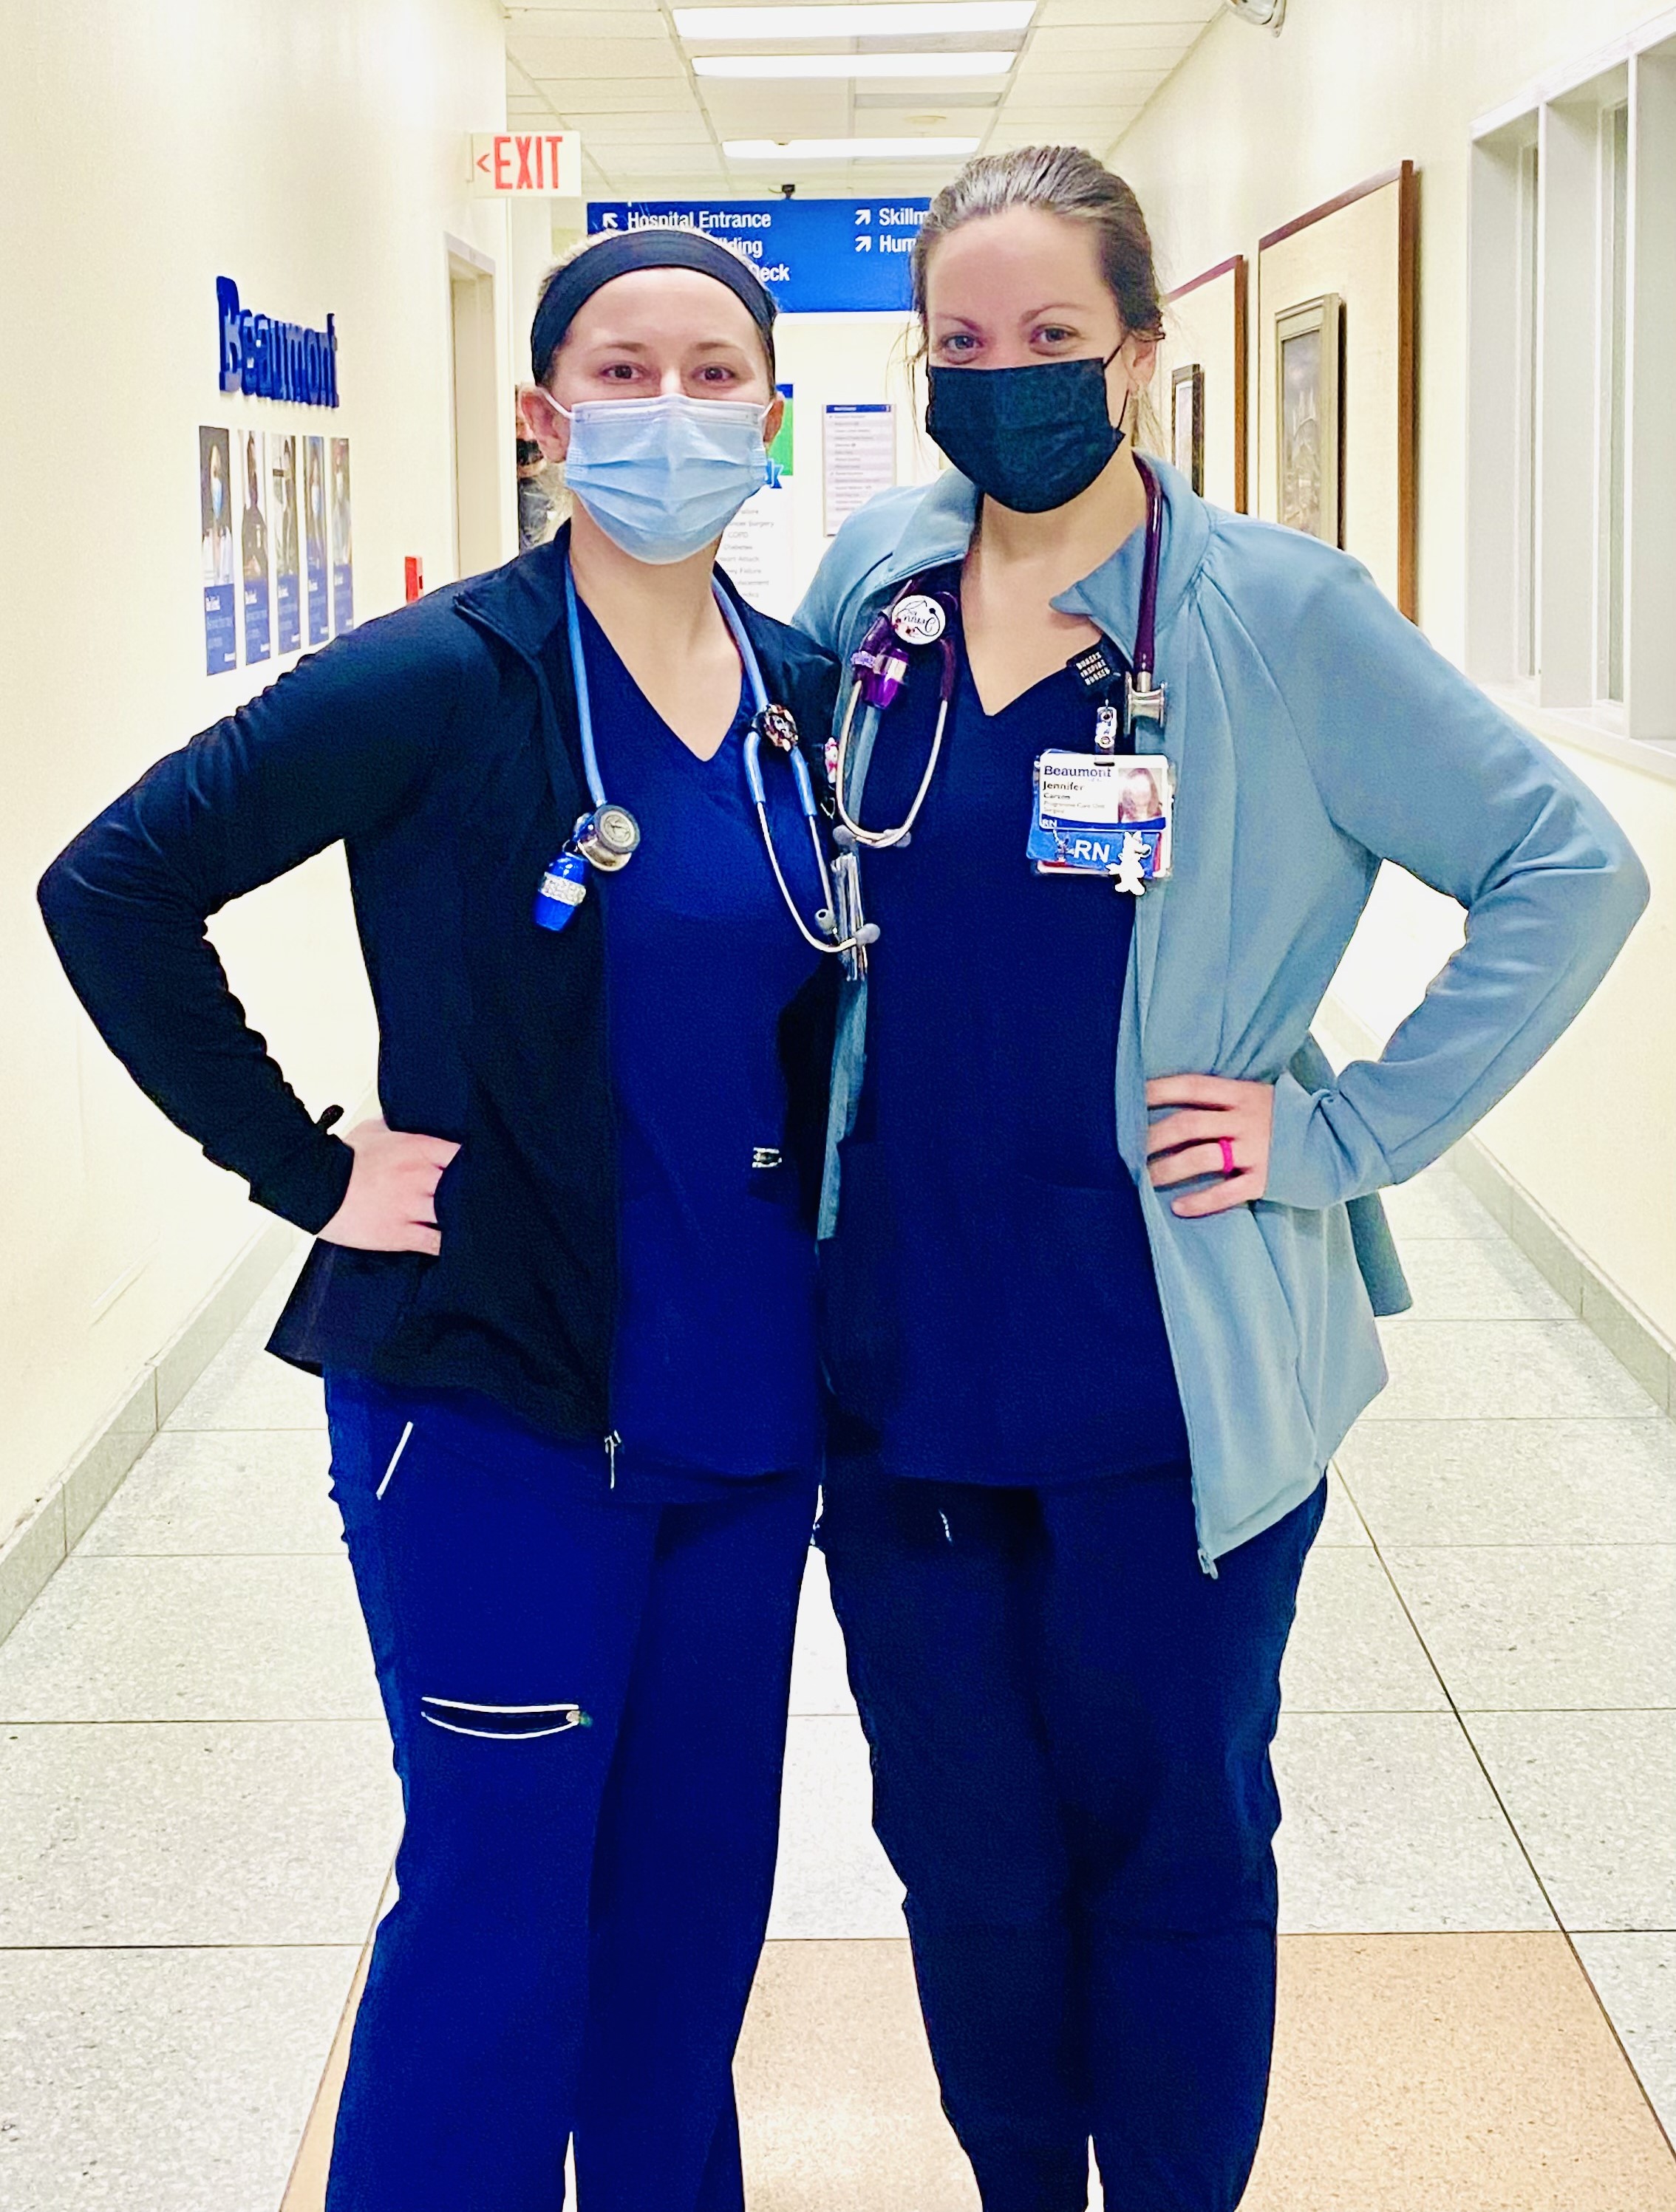 On the right is Registered Nurse, Jennifer Cavzen, and to the left is Registered Nurse, Kim Desimpelaere both working hard to carry out their responsibilities at Beaumont Hospital. Photo by Zynab Al-Timimi.